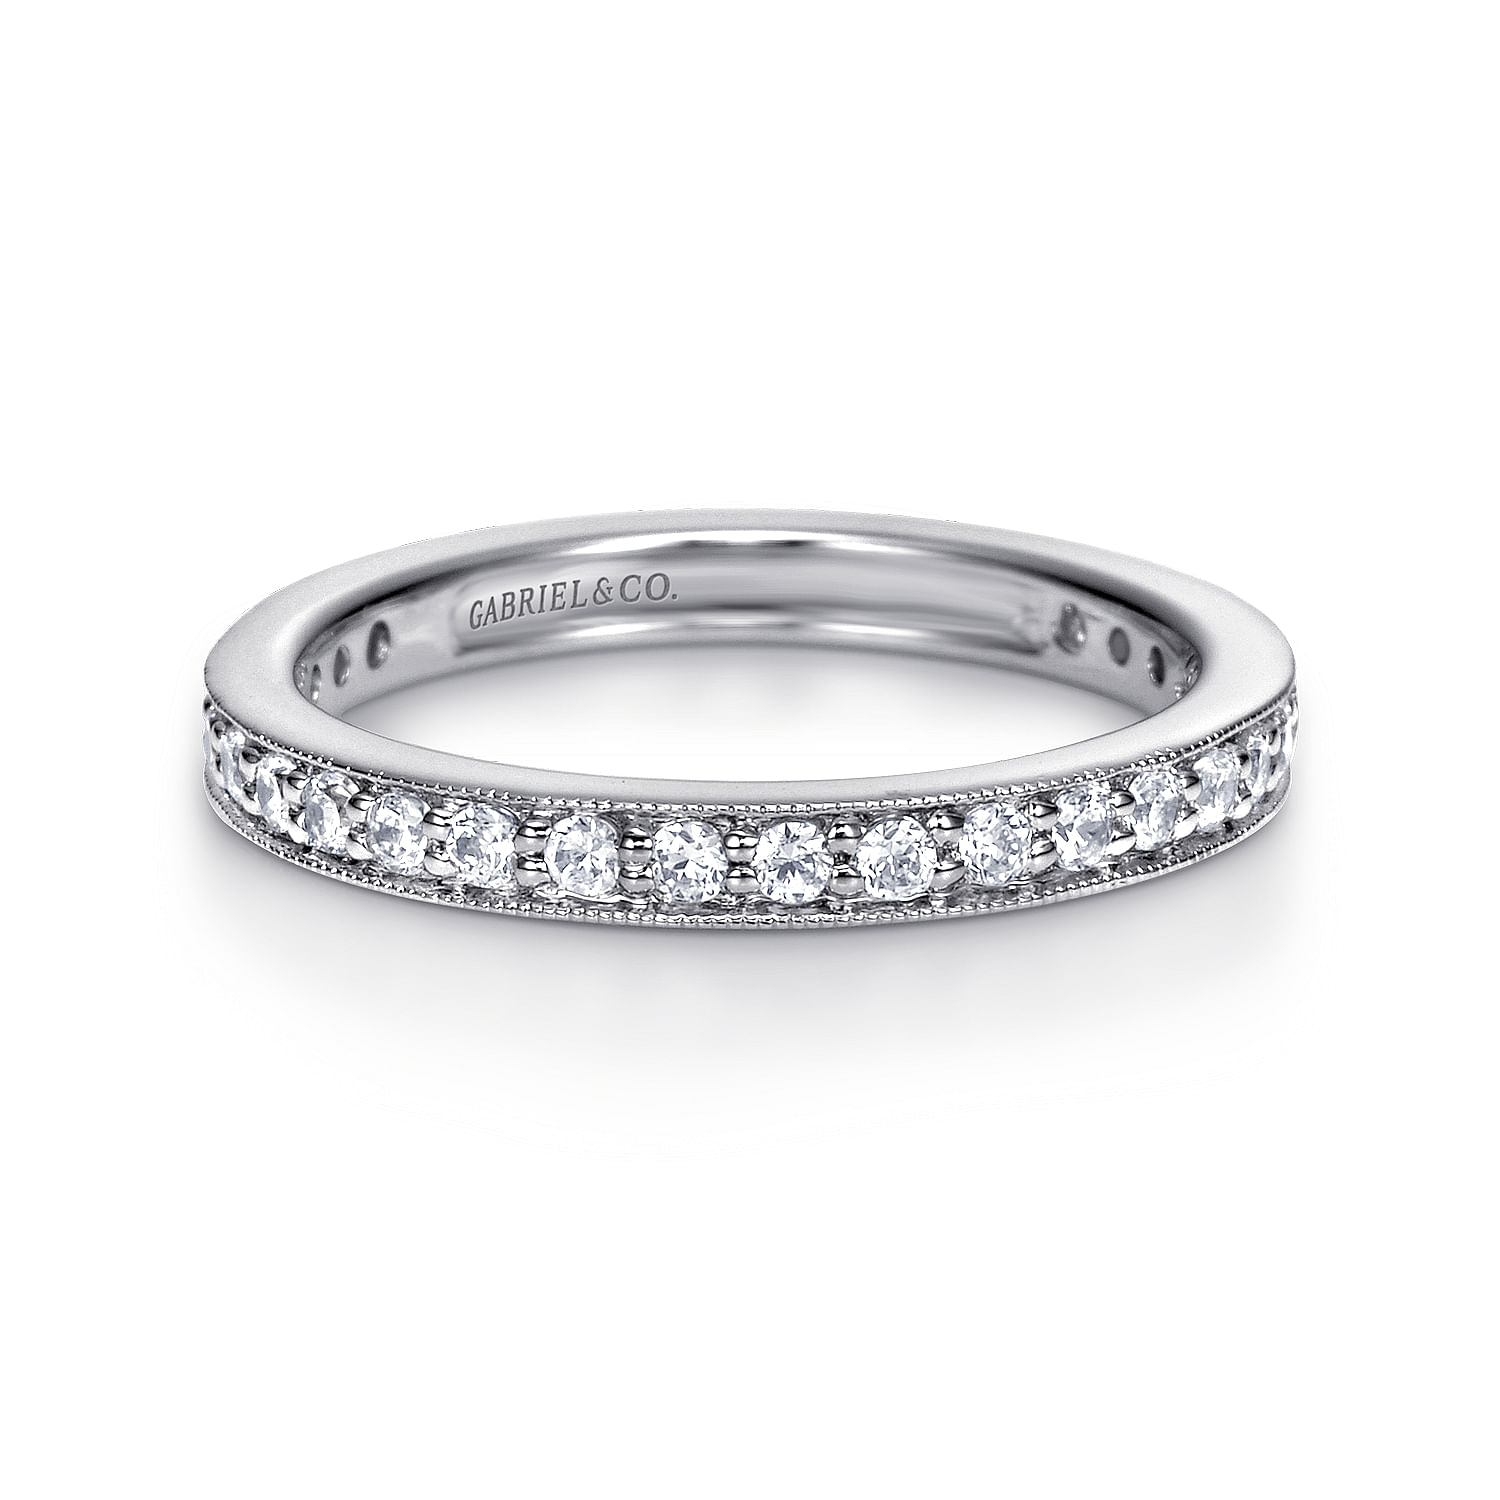 Calabria---Vintage-Inspired-14K-White-Gold-Channel-Prong-Set-Diamond-Eternity-Band1